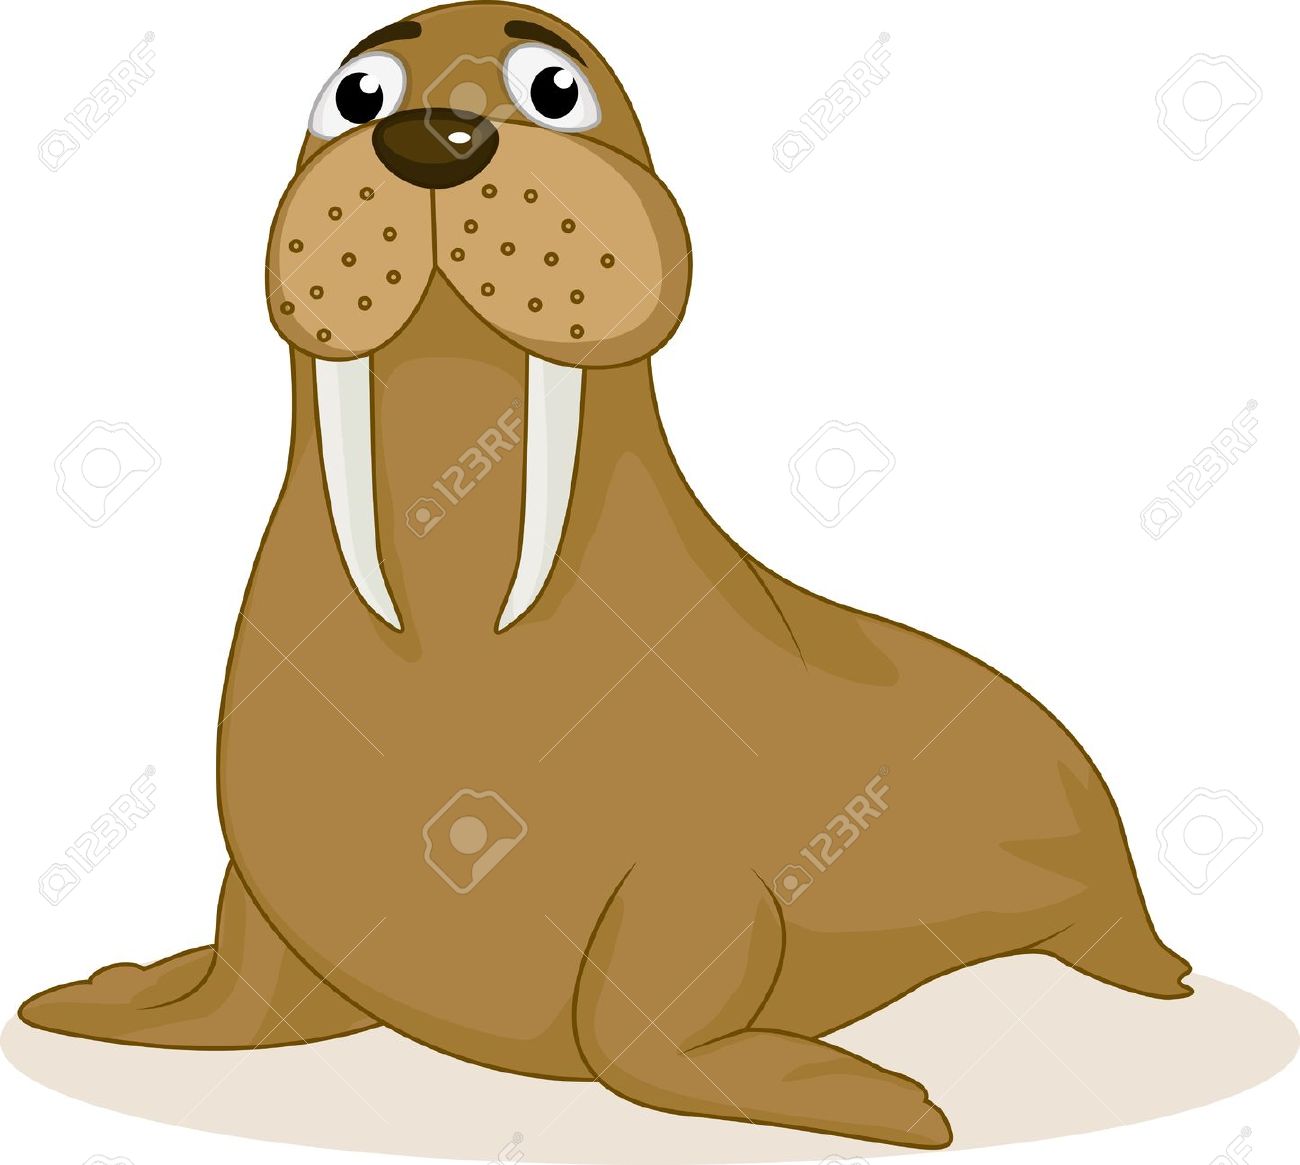 Walrus clipart #12, Download drawings